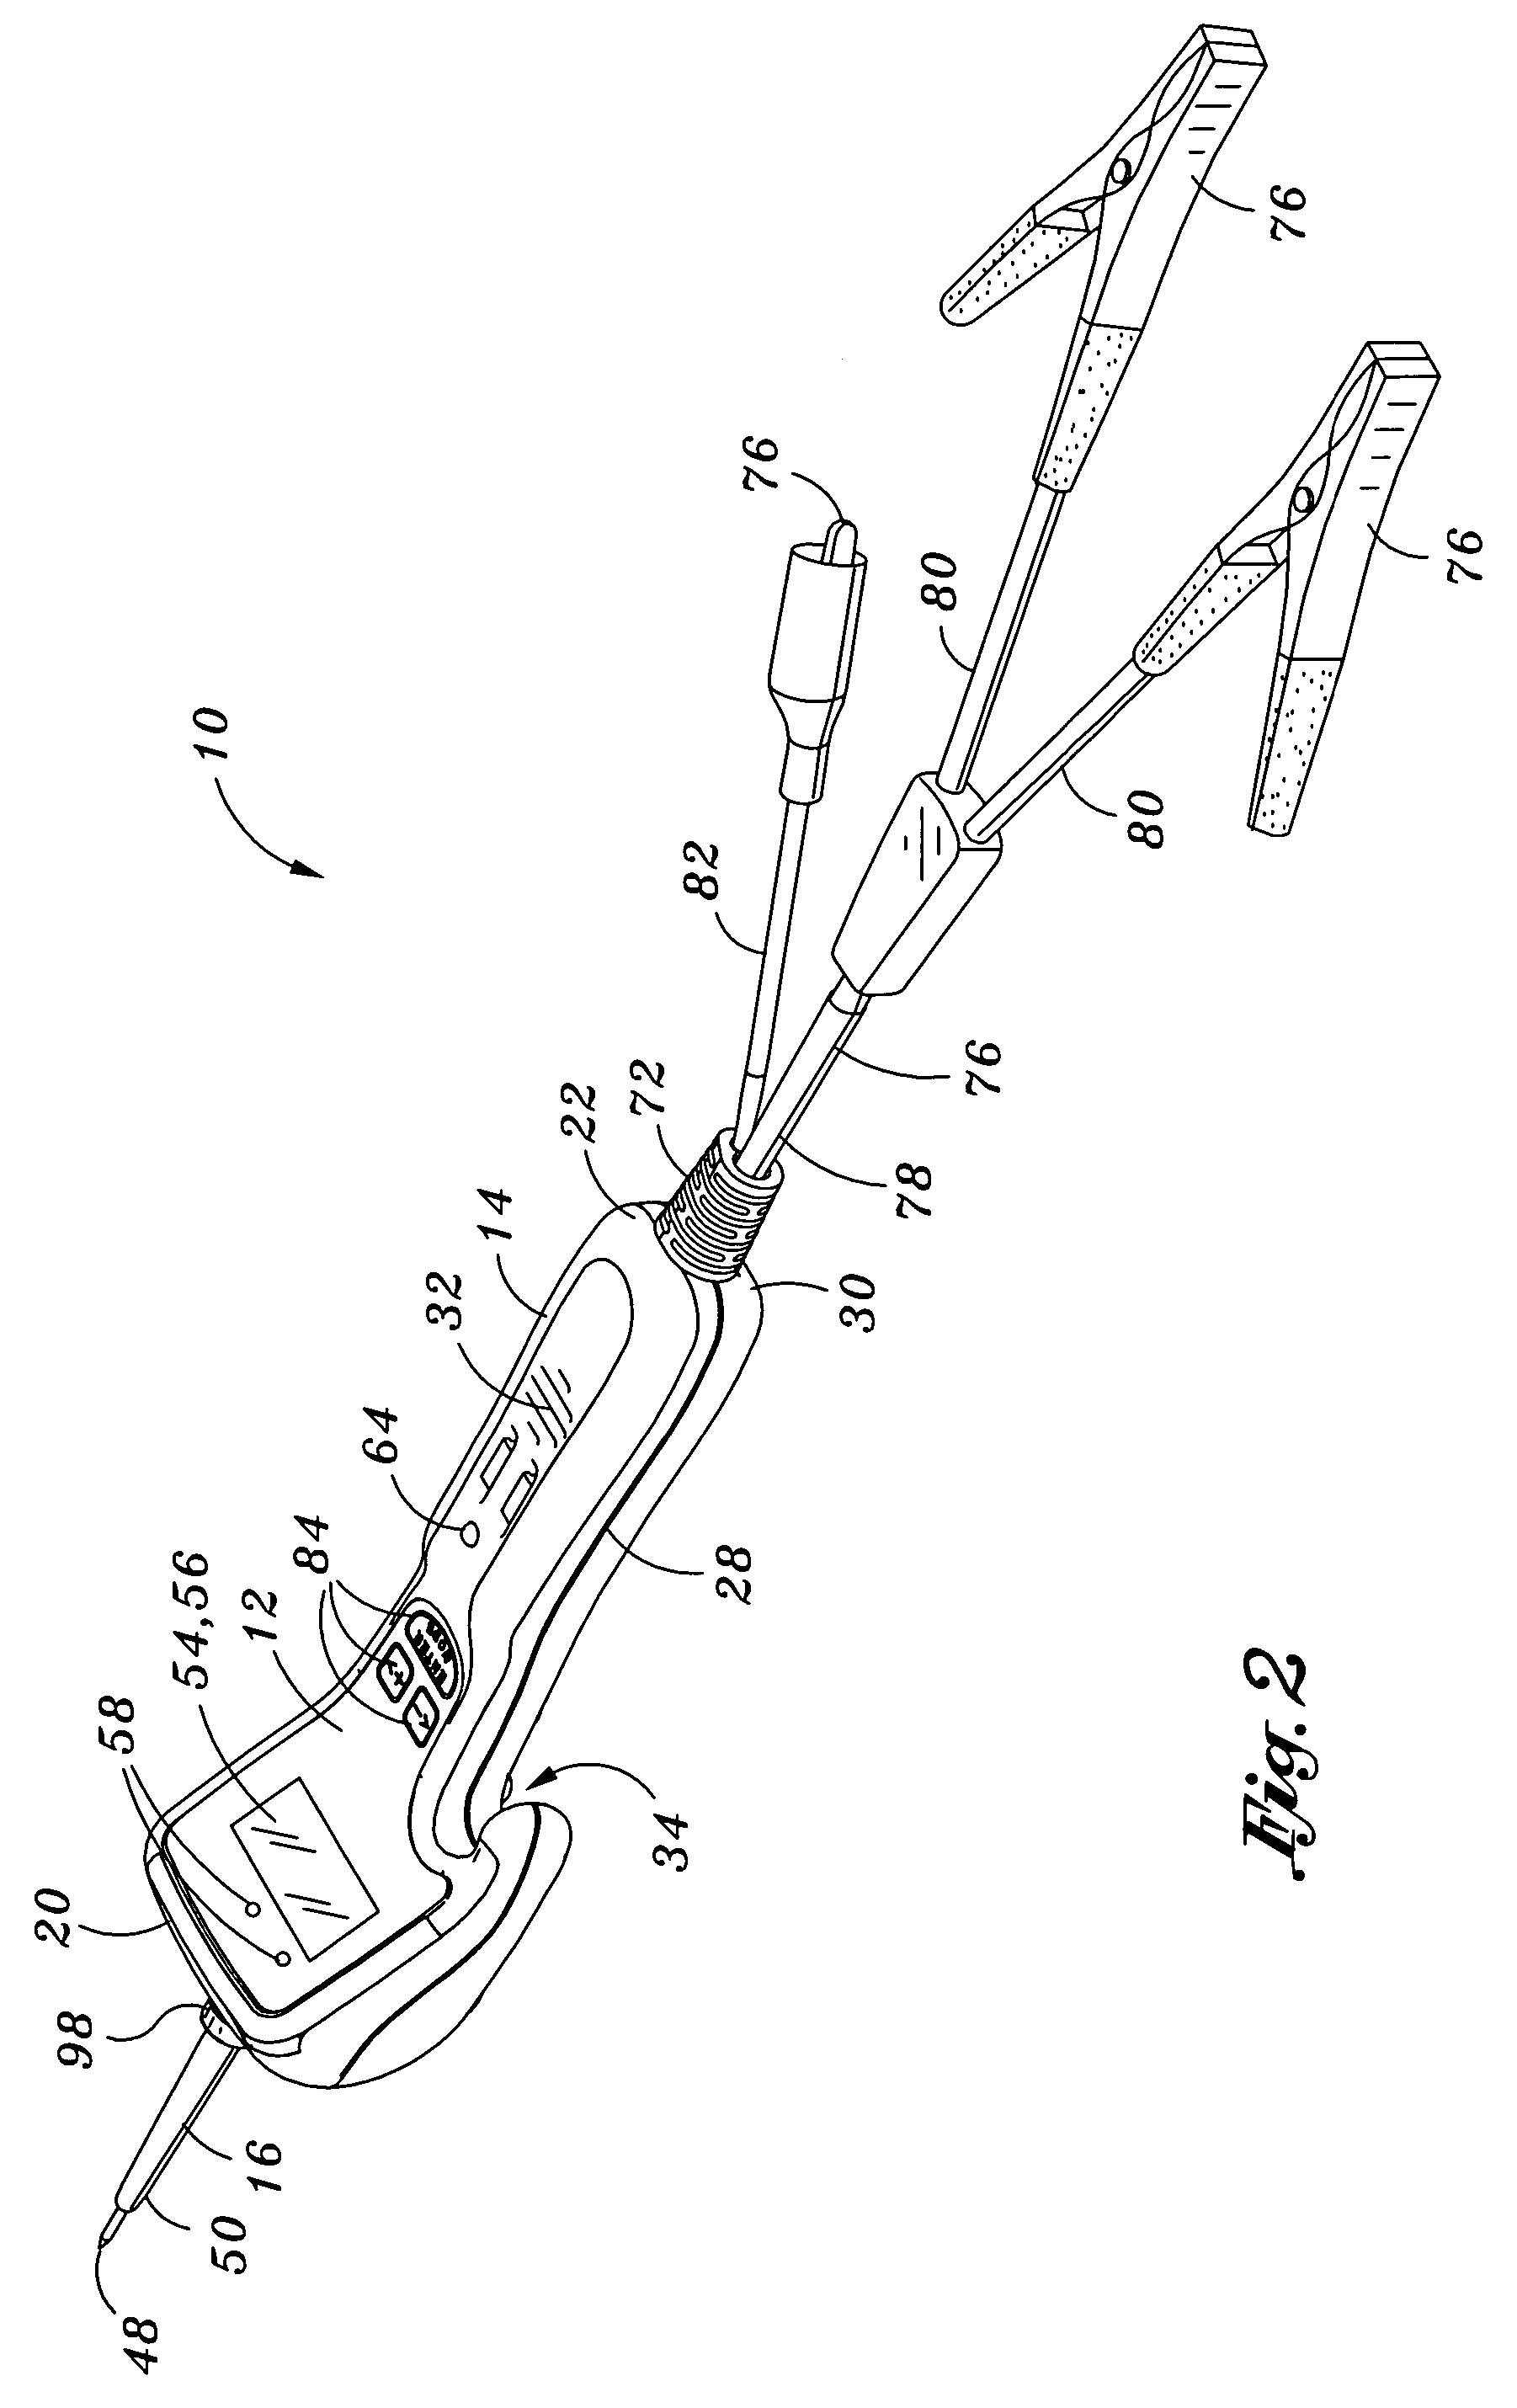 Energizable electrical test device for measuring current and resistance of an electrical circuit